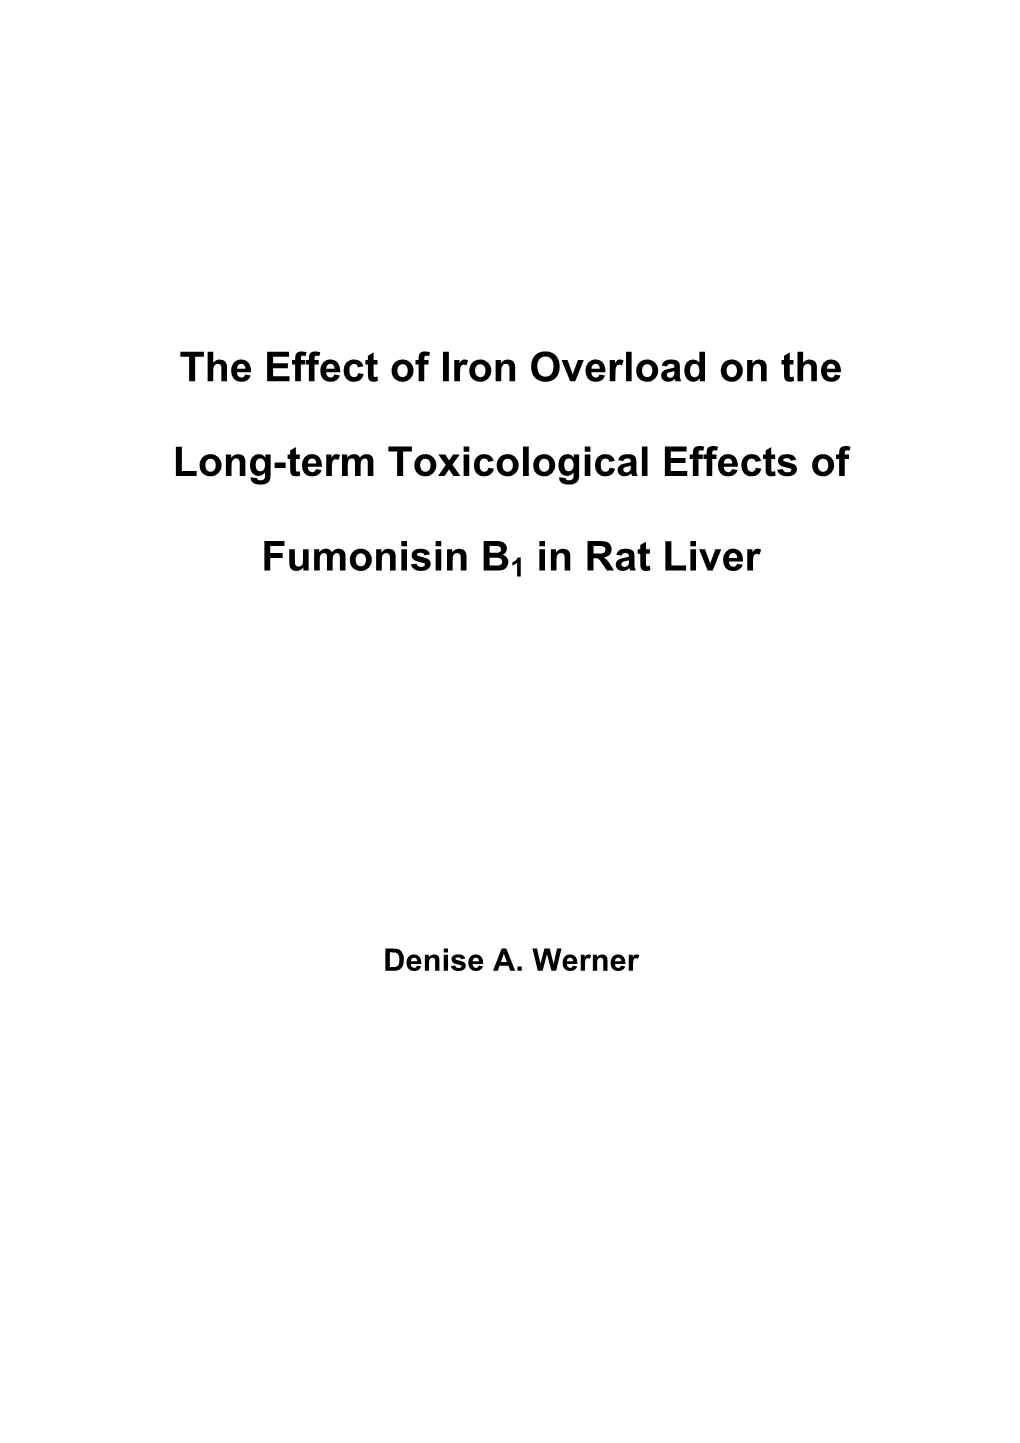 The Effect of Iron Overload on the Long-Term Toxicological Effects of Fumonisin B1 in Rat Liver